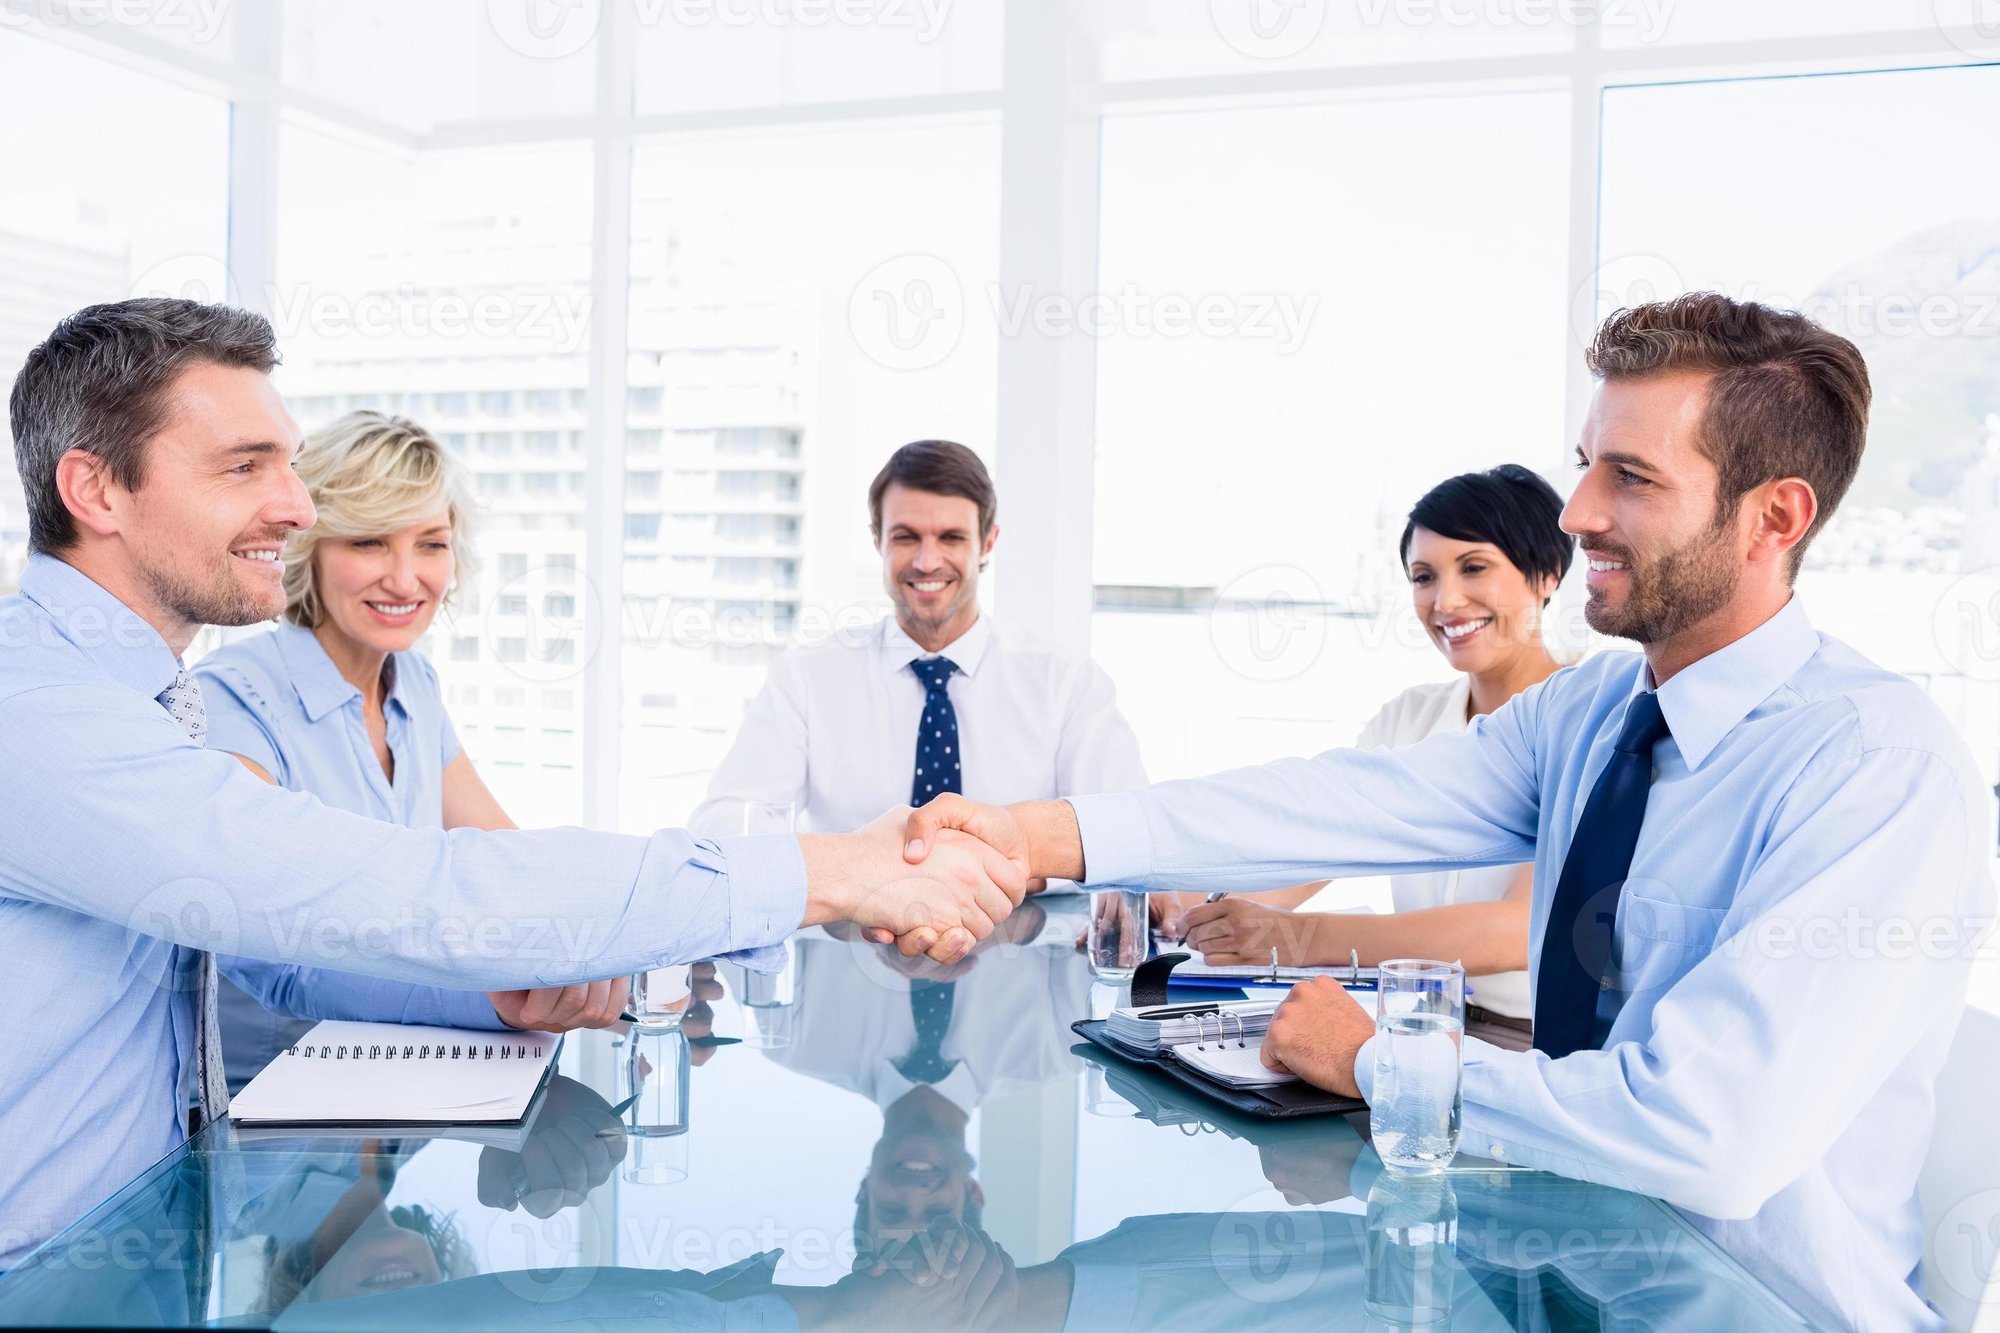 executives-shaking-hands-during-business-meeting-photo